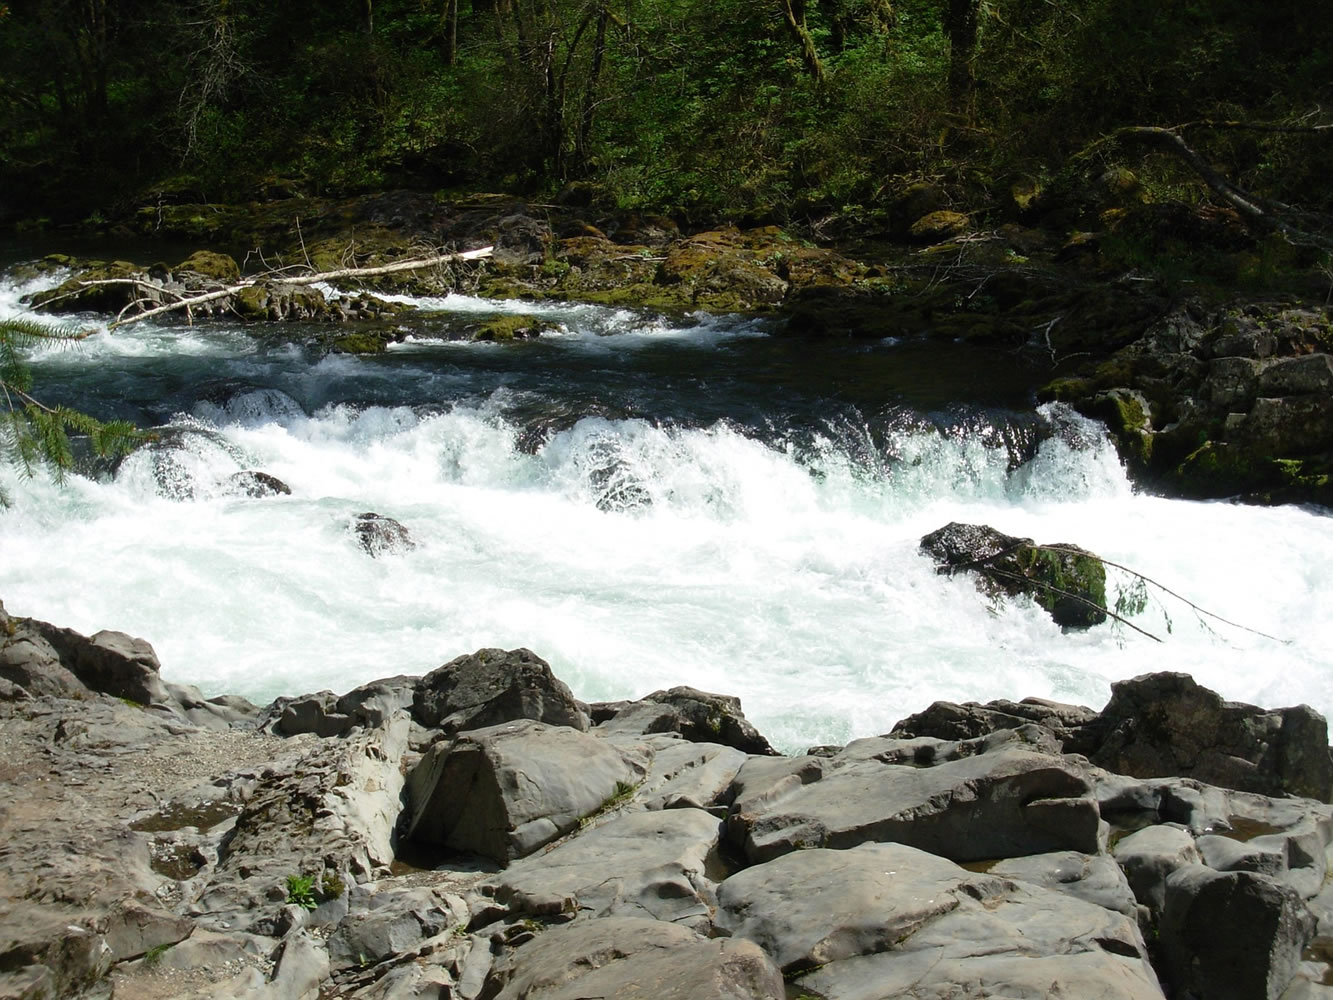 Columbian files
Moulton Falls, shown in 2008, is on the East Fork Lewis River between Yacolt and Battle Ground.